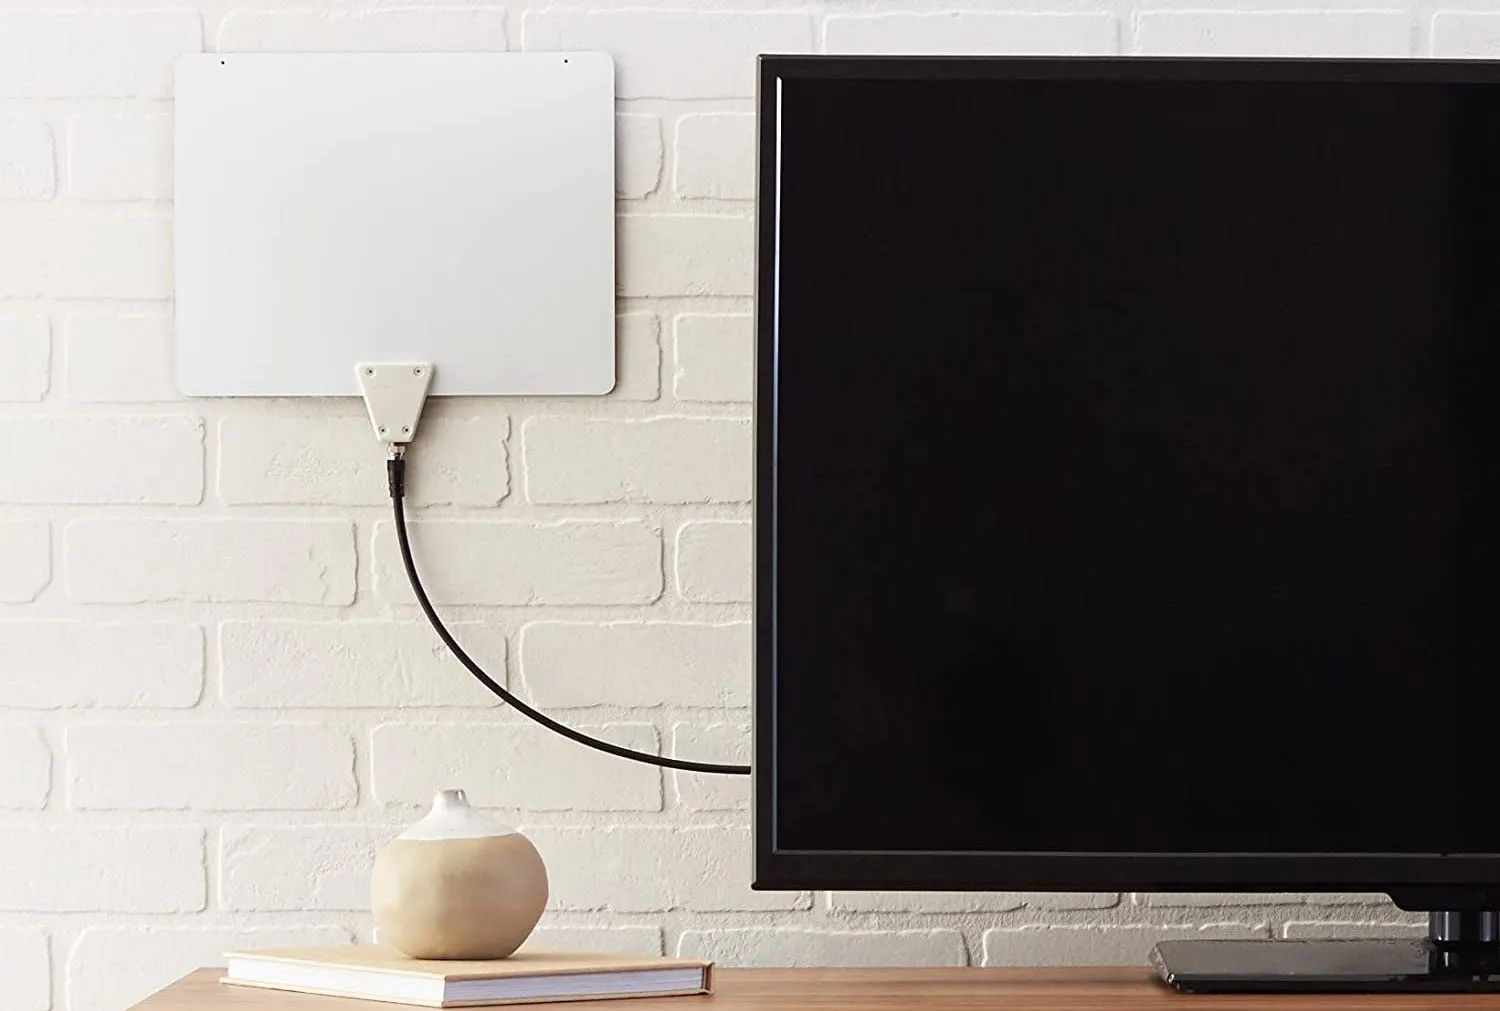 How To Hook Antenna To Smart TV